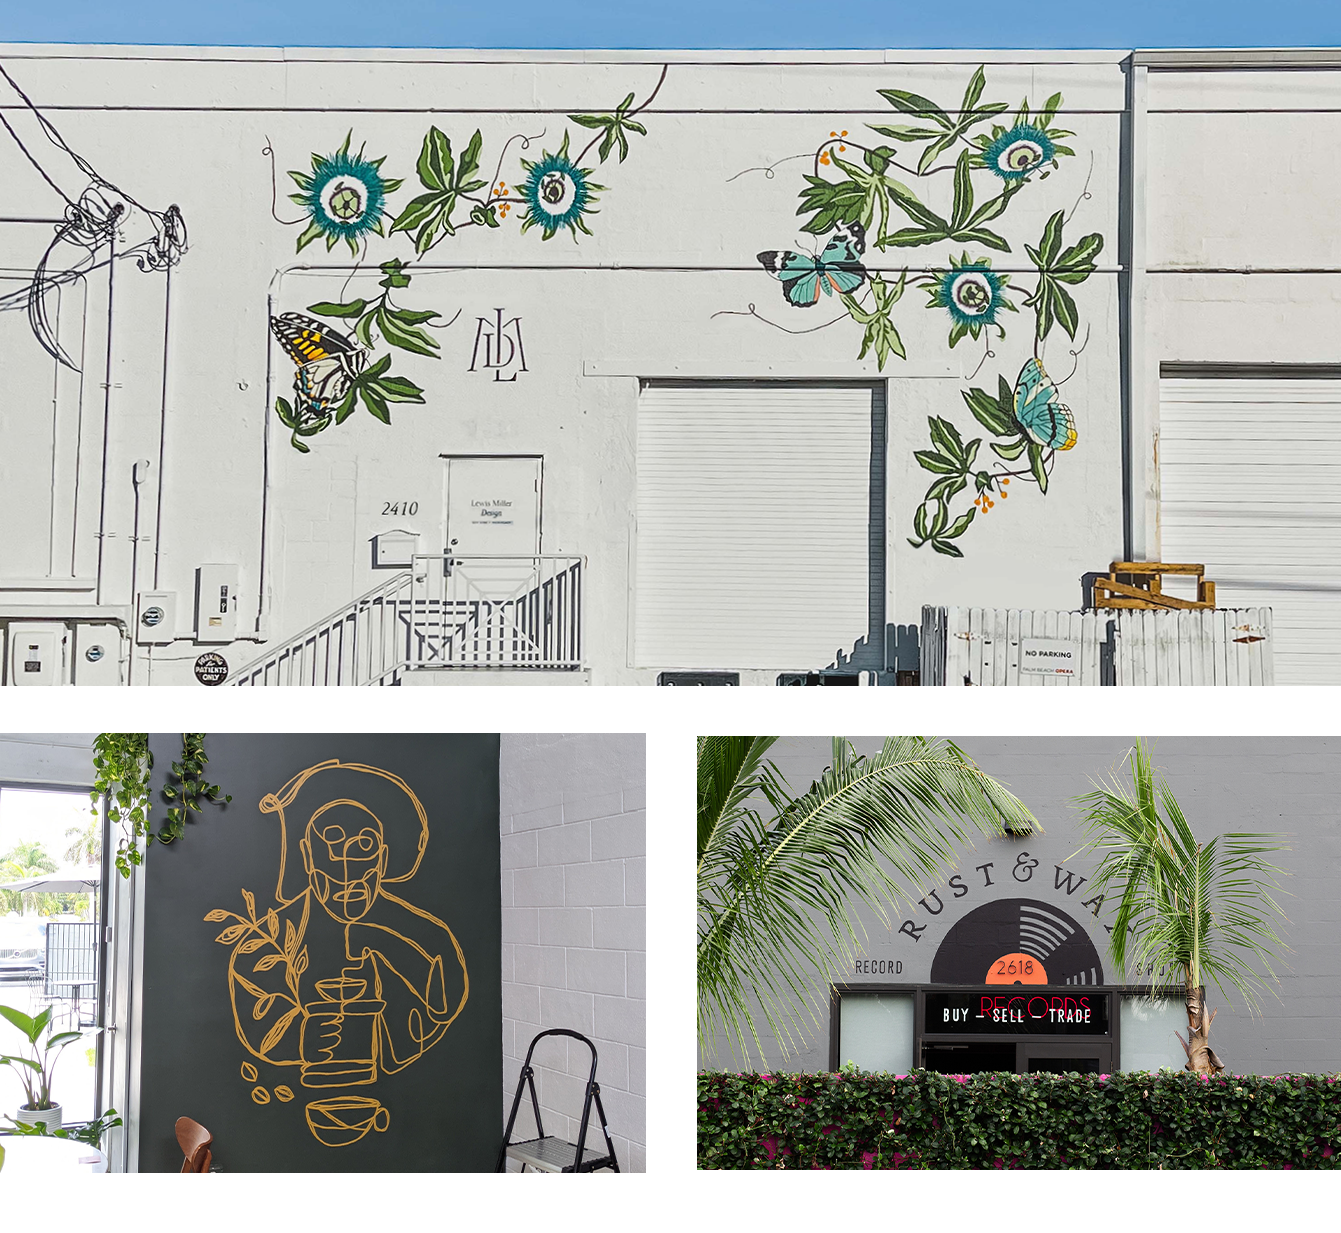 Collage of murals painted by Gather & Seek, including a botanical & butterfly scene for Lewis Miller Design, Composition Coffee's mascot, and storefront signage for Rust & Wax Record Shop.